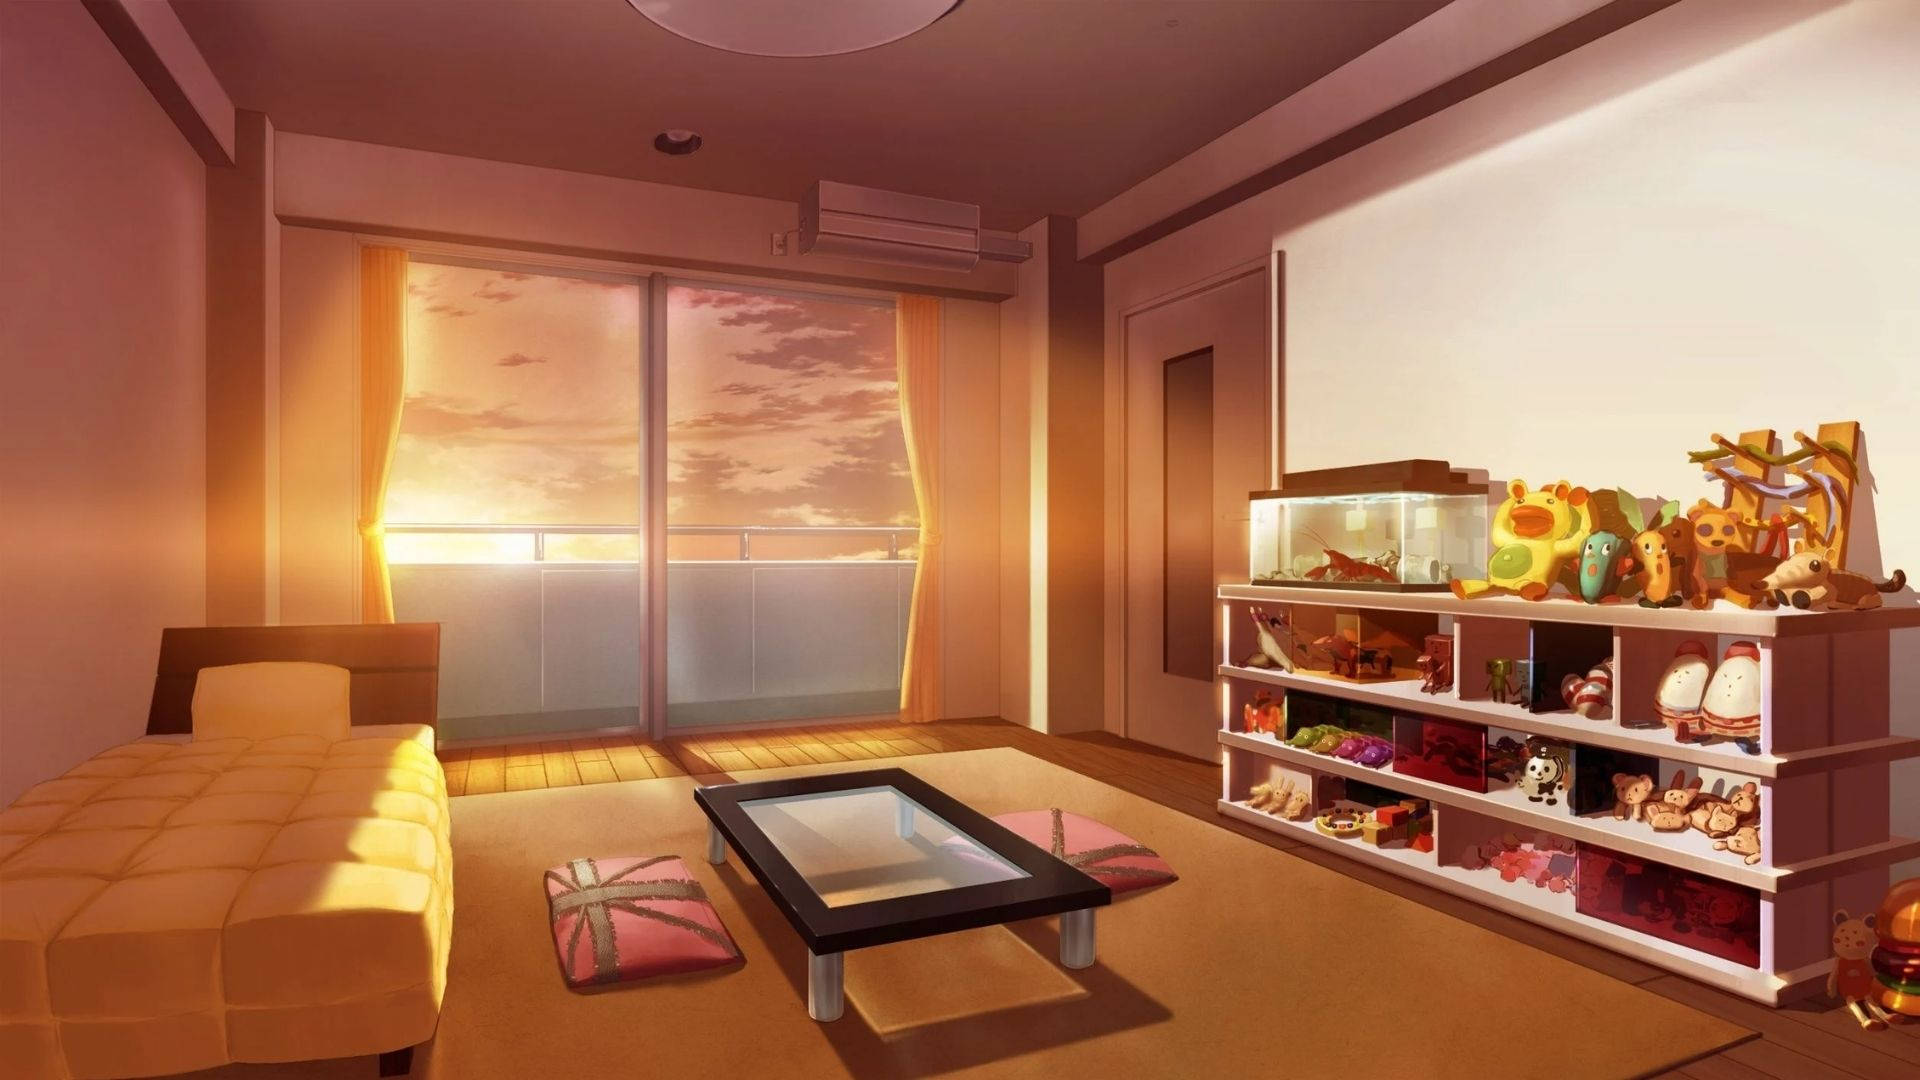 Anime Room At Sunset Background